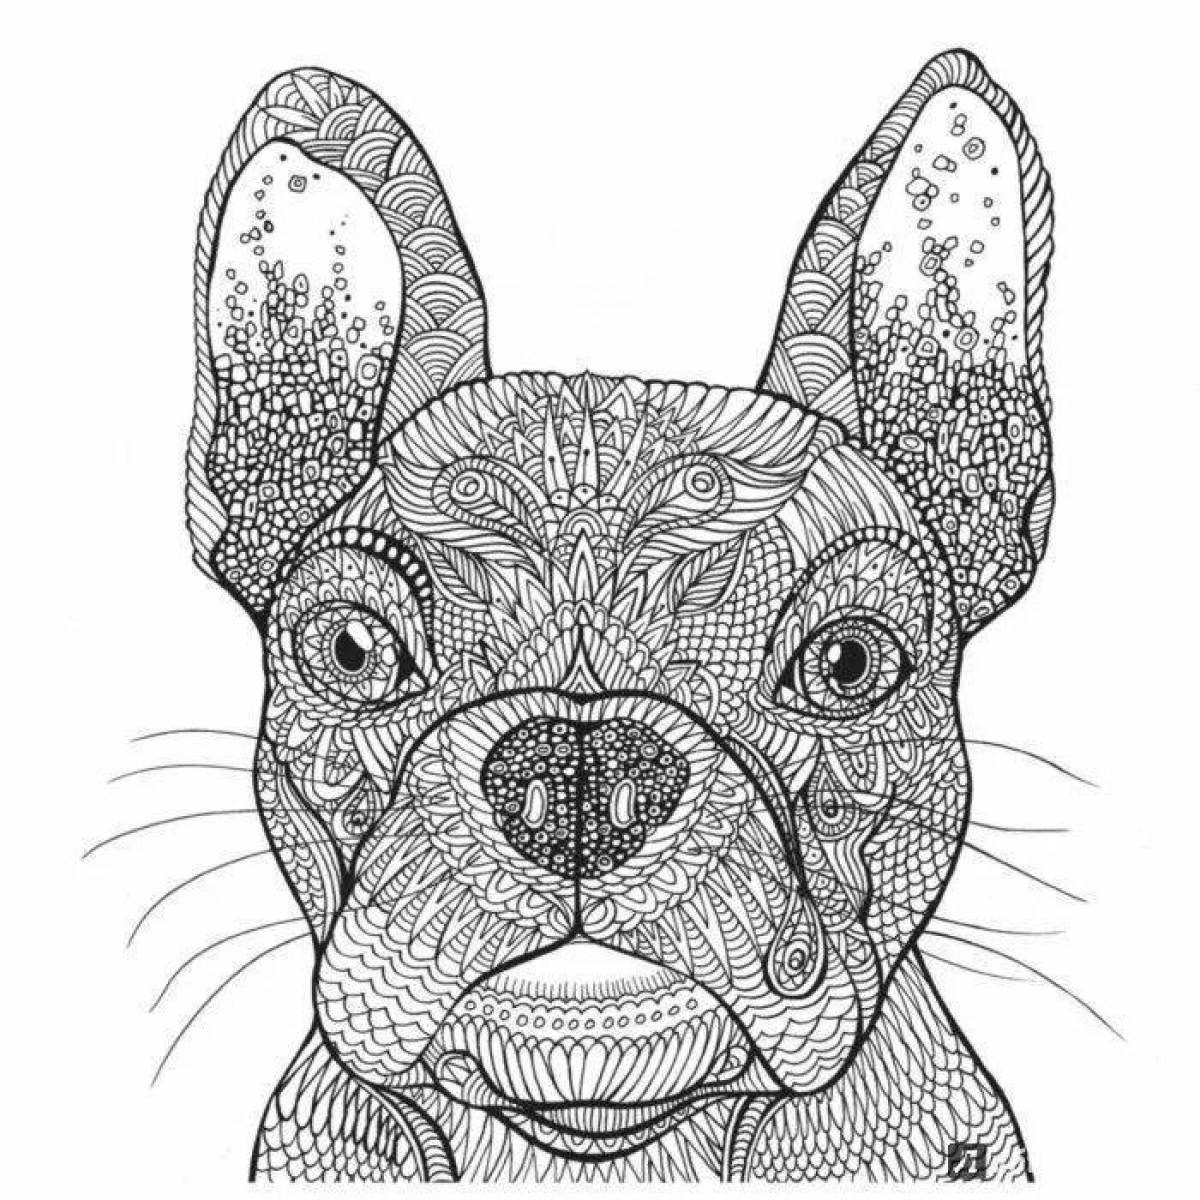 Great dog coloring pages for adults